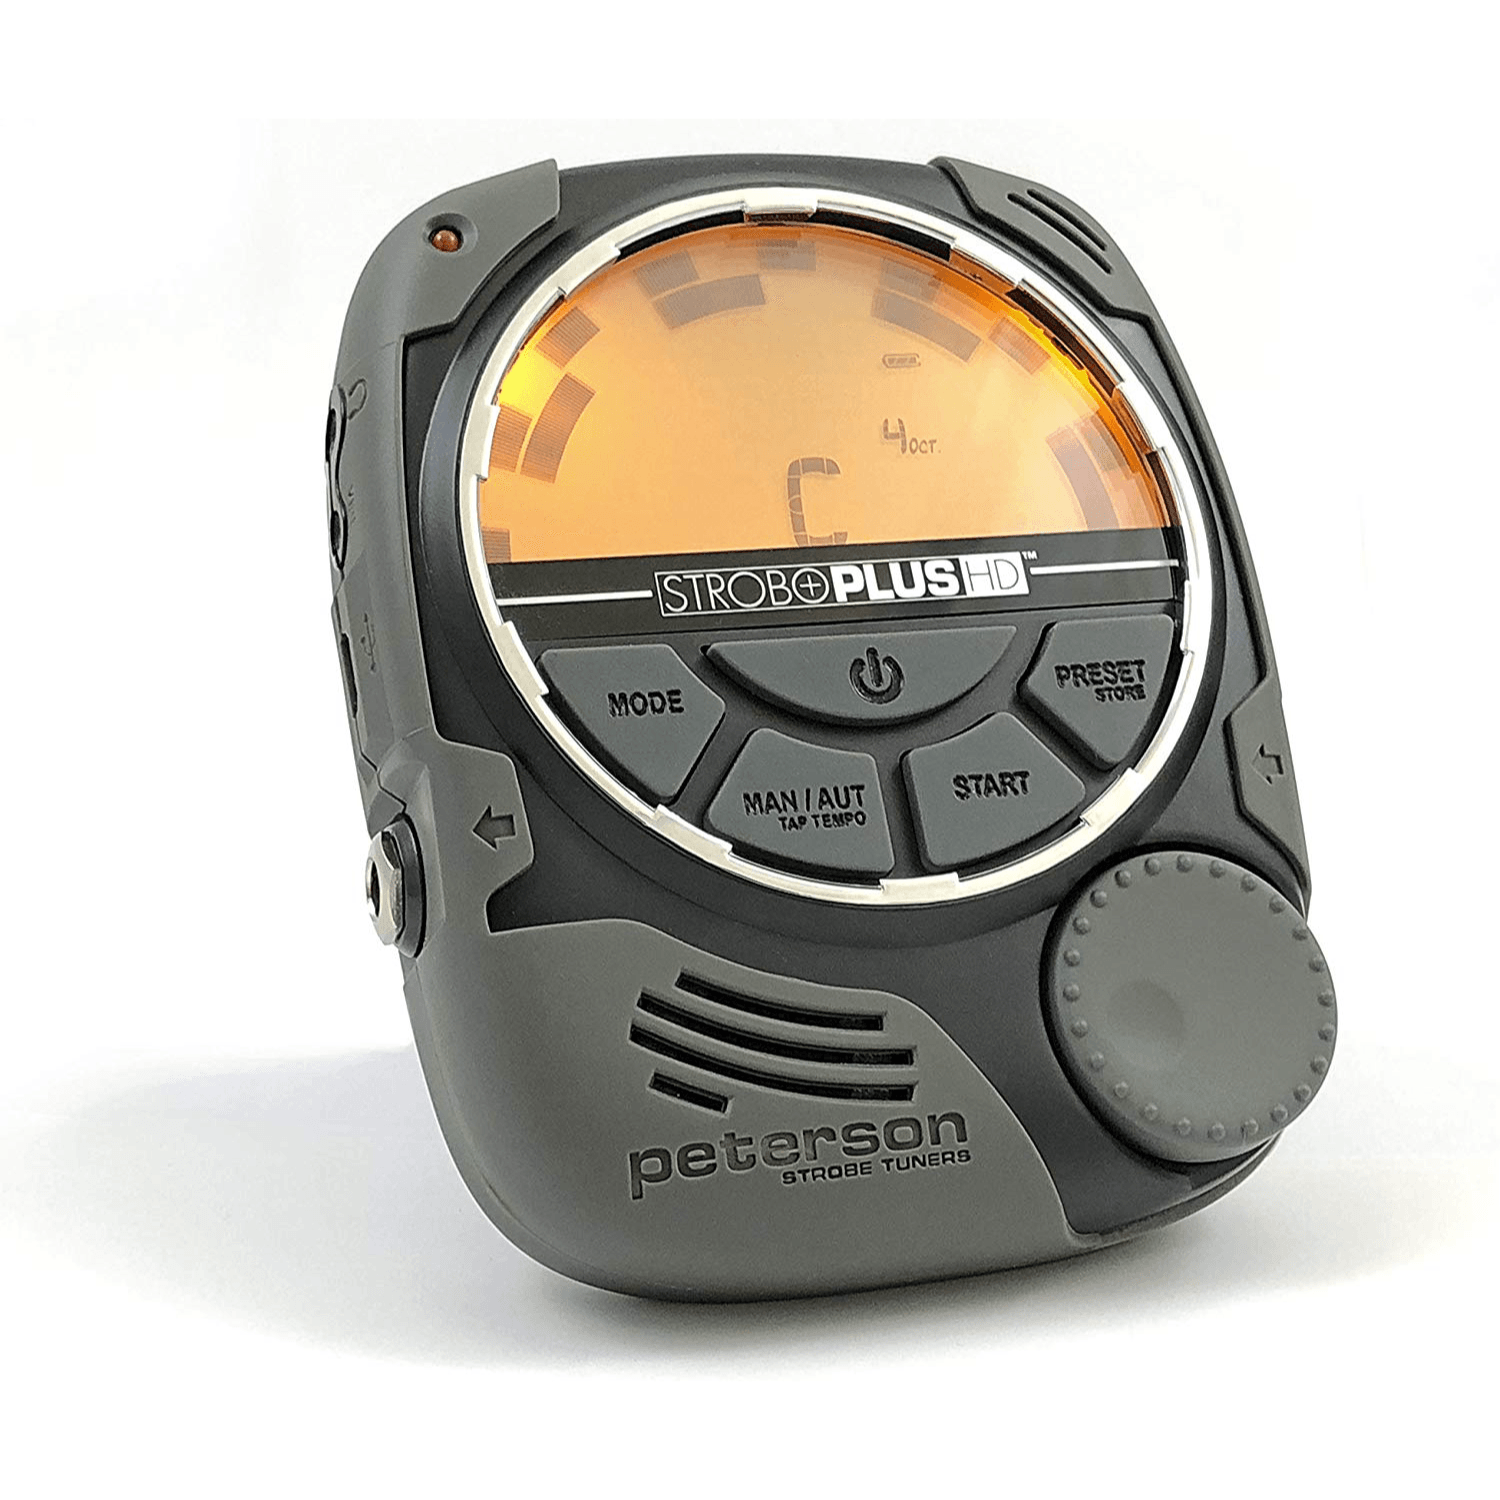 Stroboplus Tuner Upgradeable Metronome - Tuners & Metronomes by Peterson at Muso's Stuff